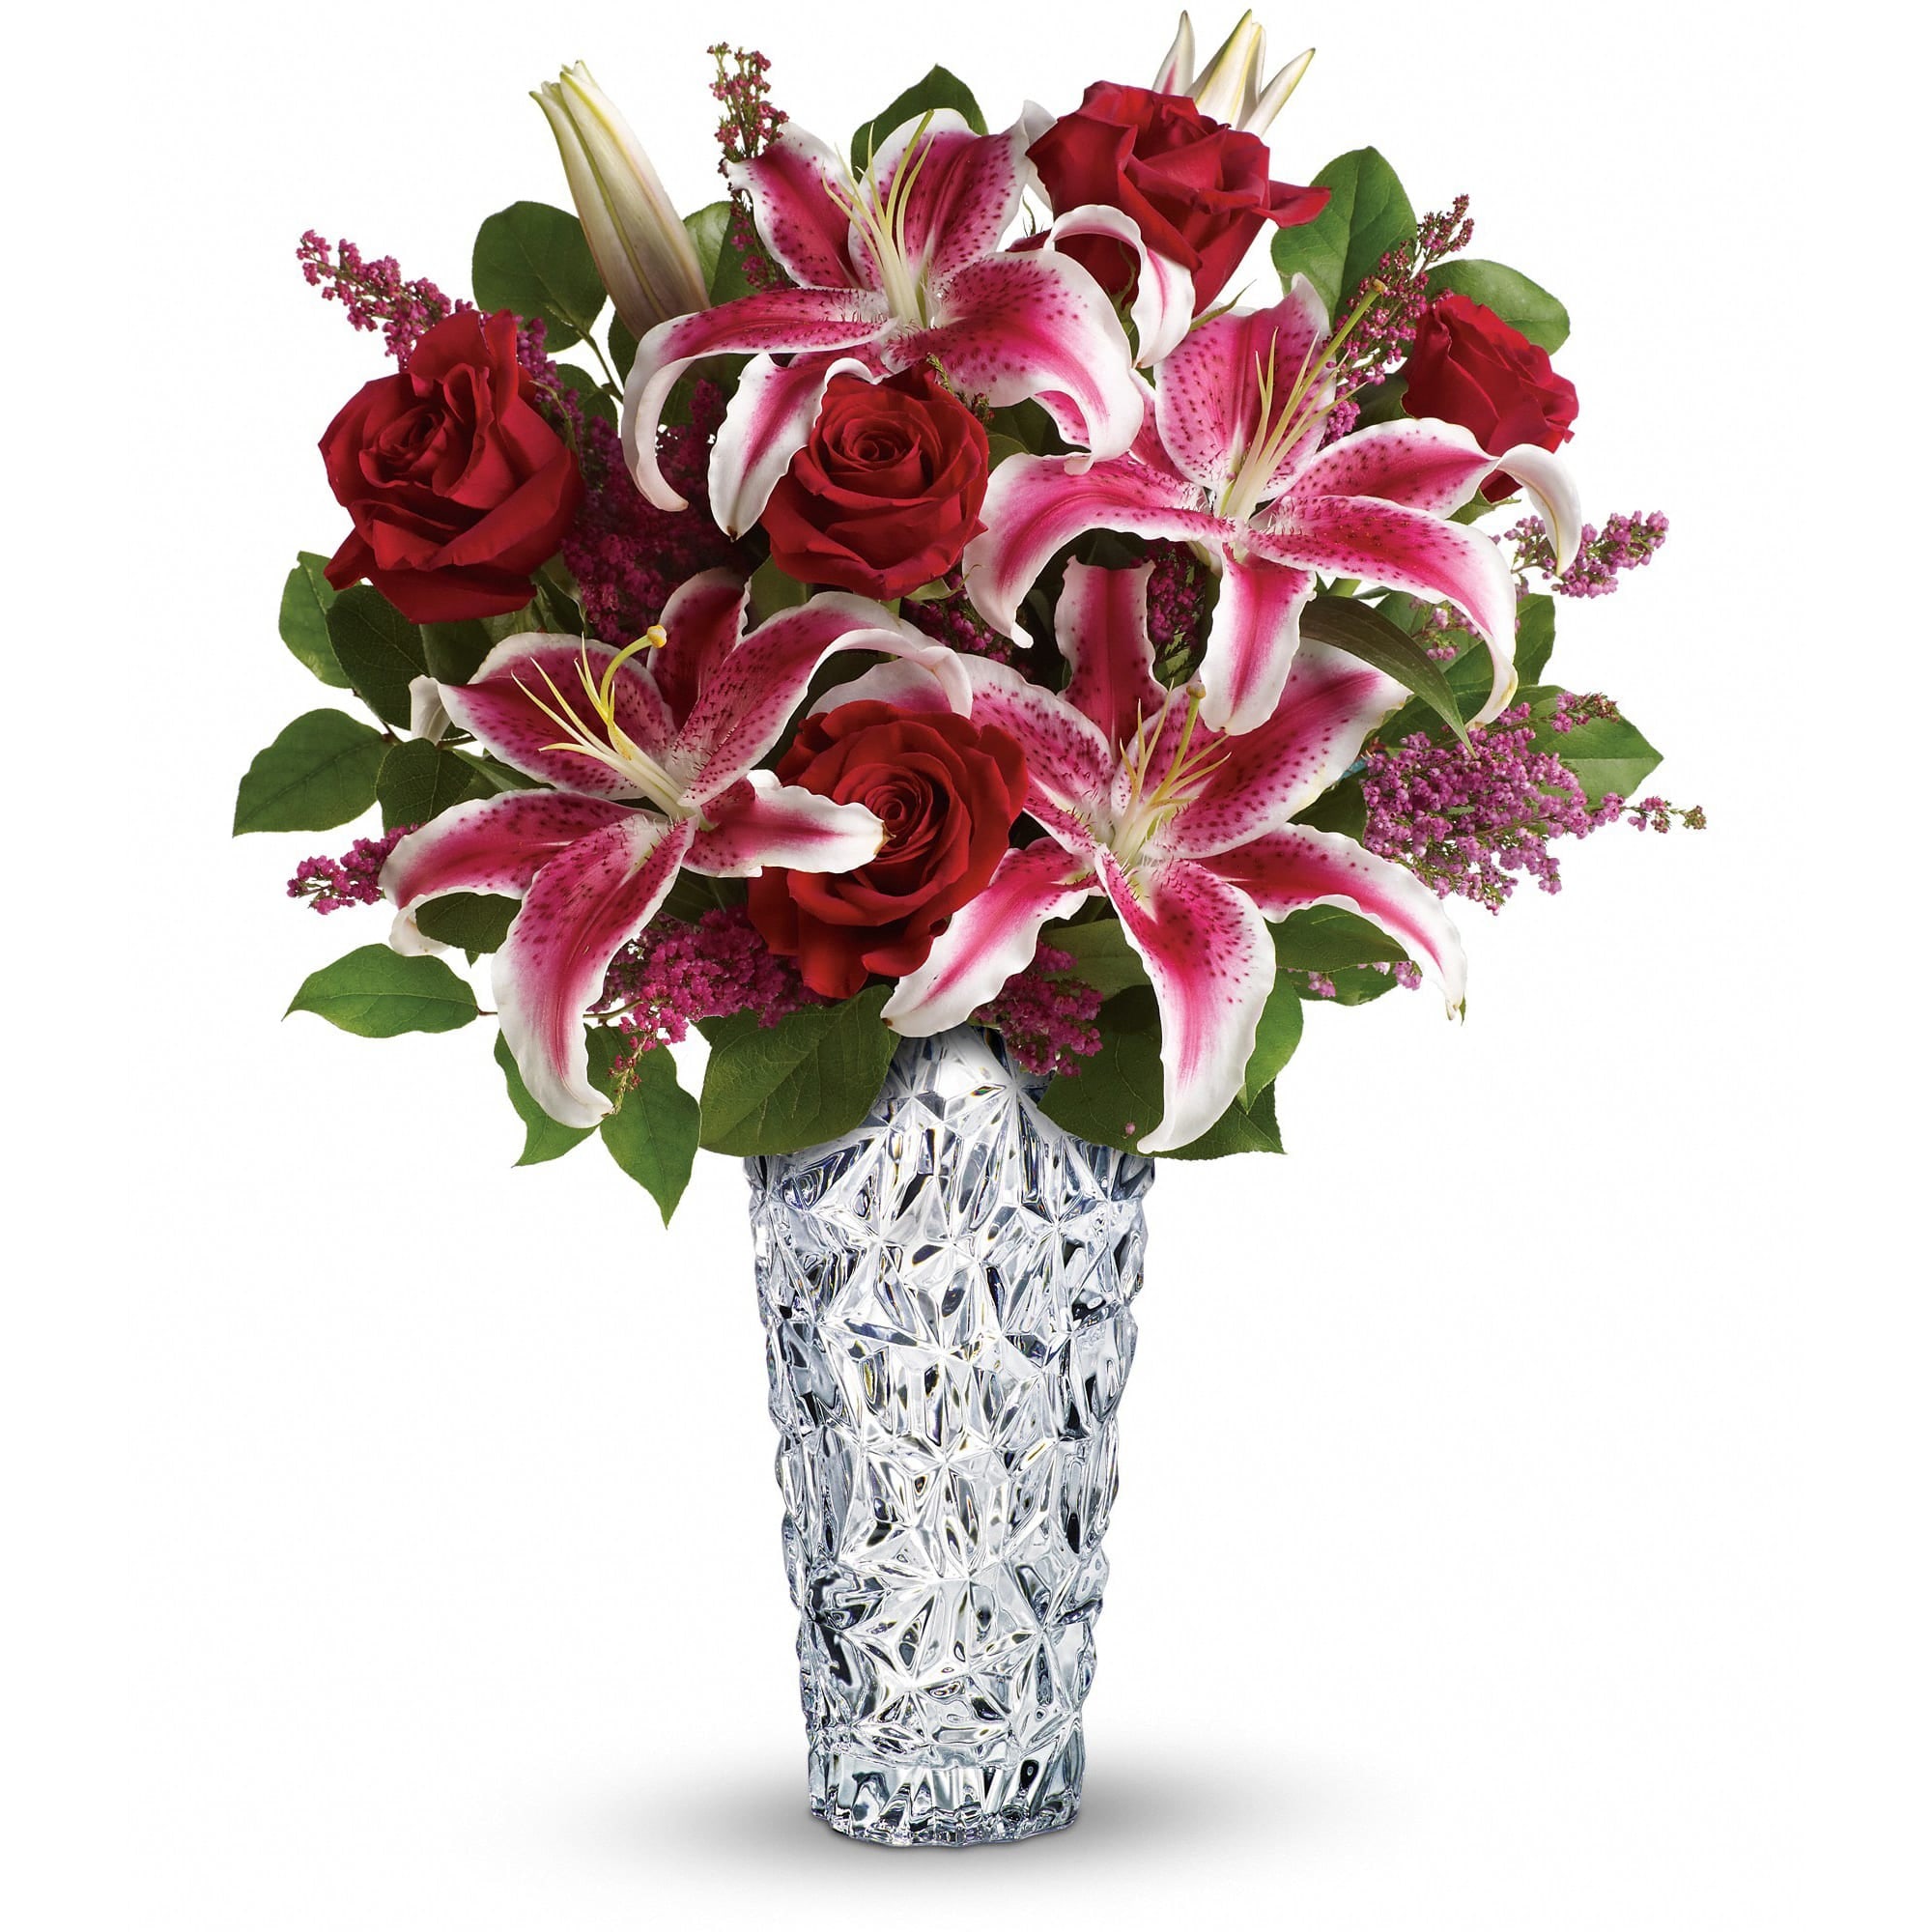 Teleflora's Diamonds And Lilies Bouquet - A stunning beauty! Long-stem red roses and pink stargazer lilies are arranged in a exquisitely detailed sparkling glass vase for a gift that will surely delight!  